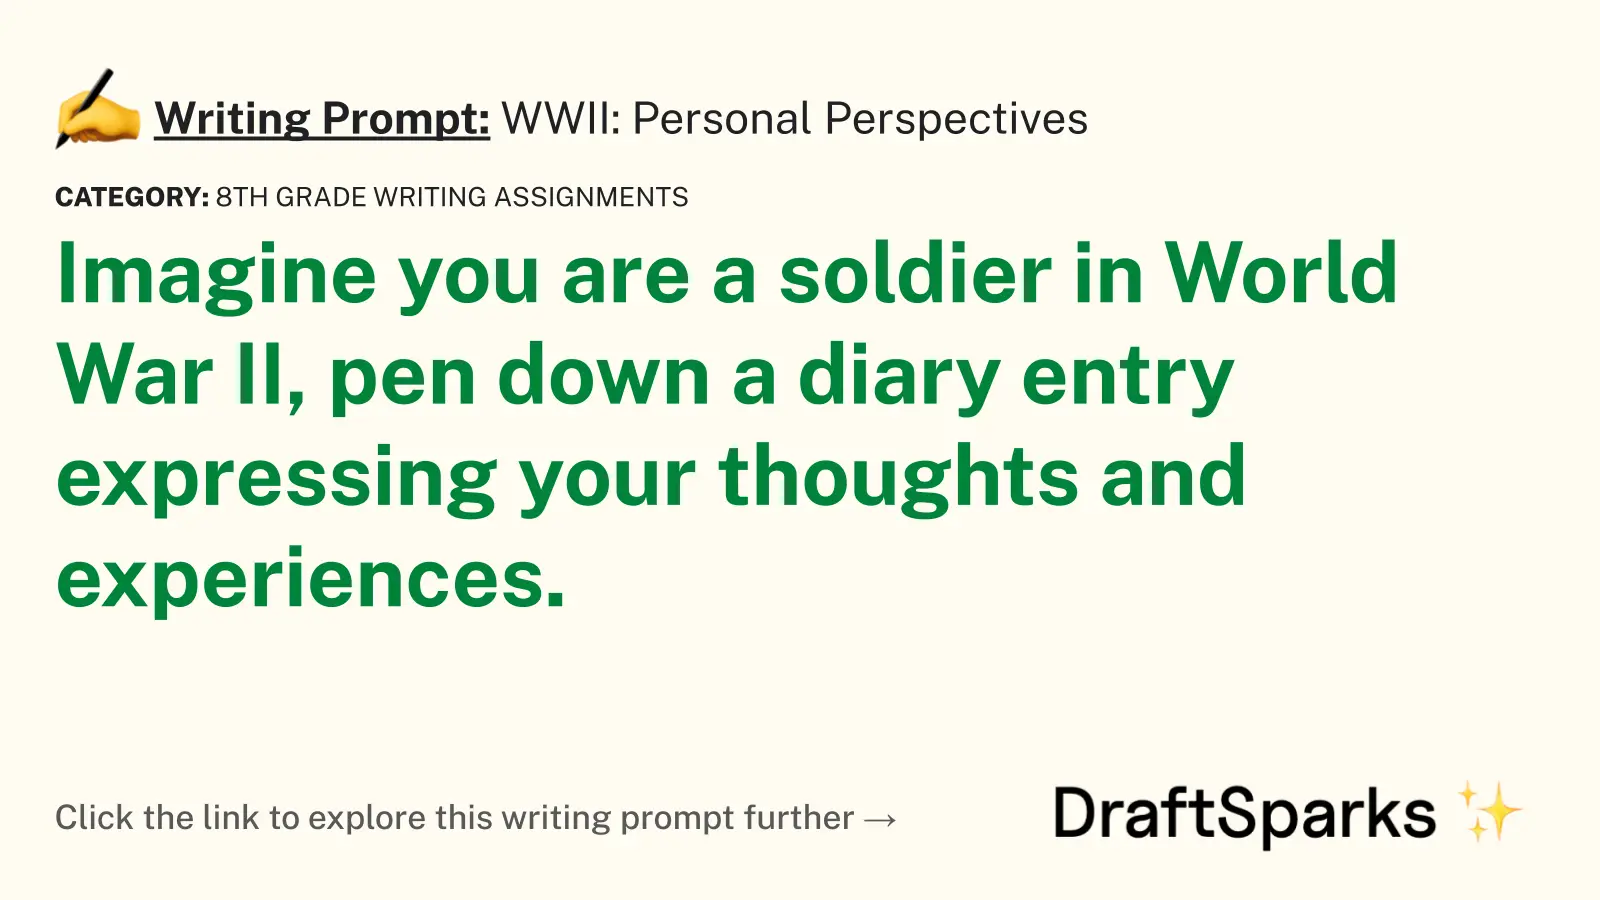 WWII: Personal Perspectives